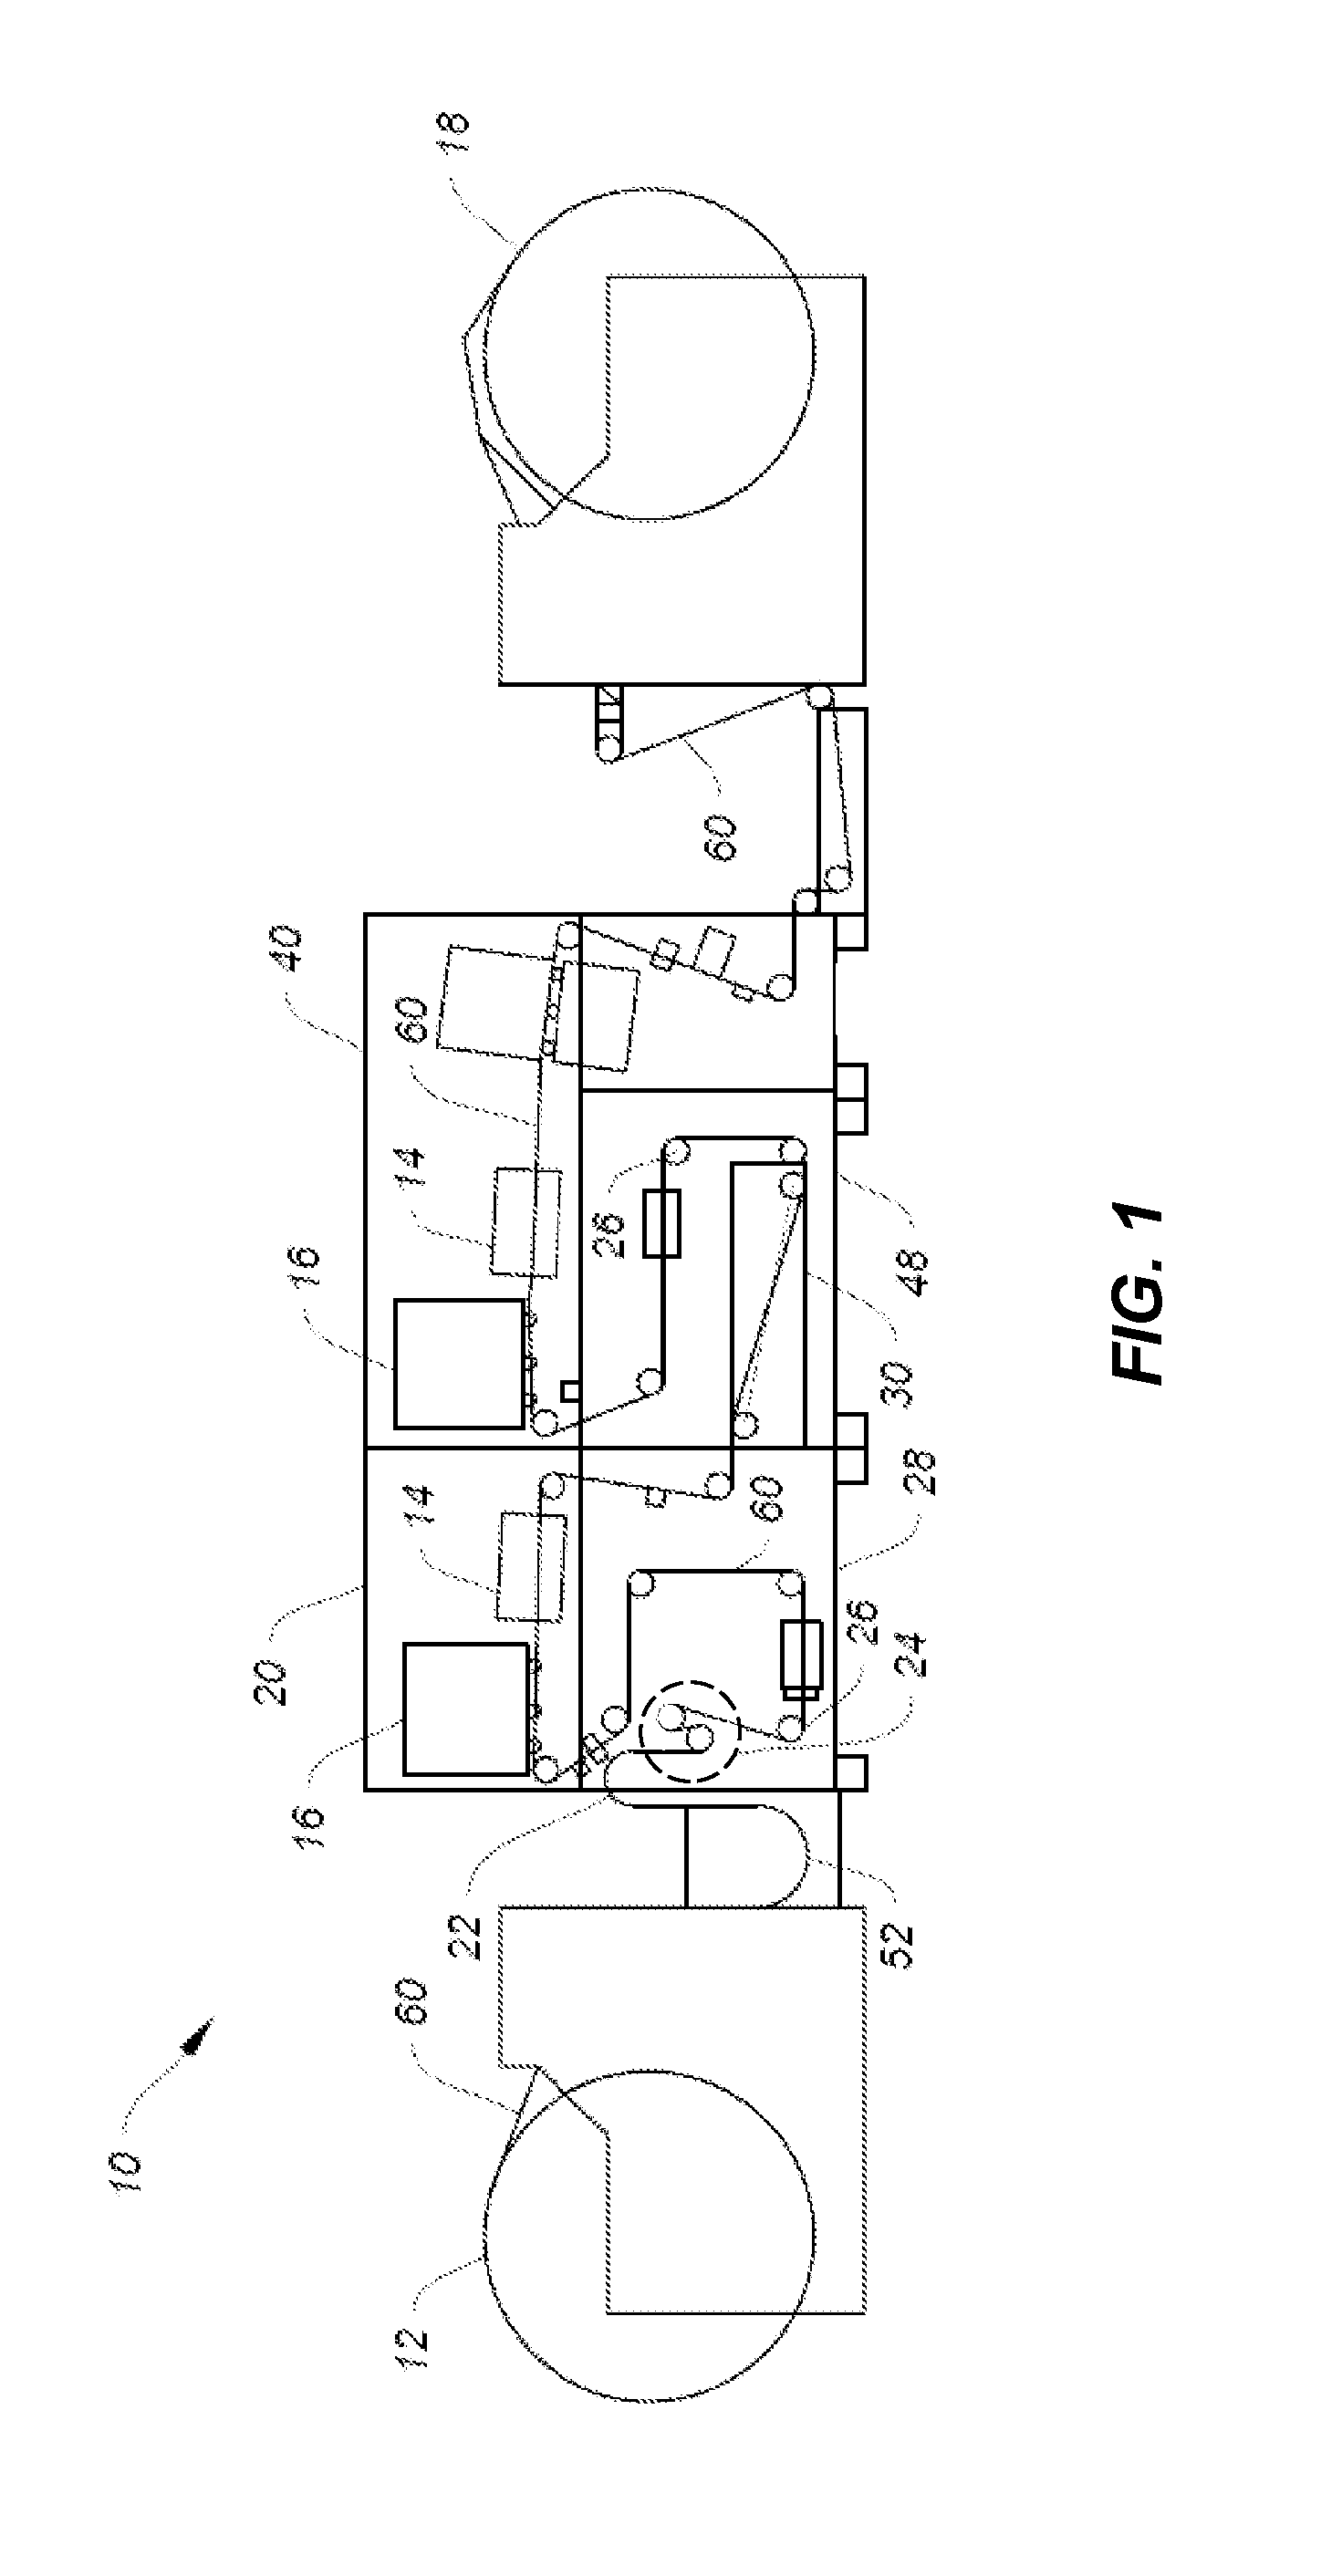 Method for automatically-adjusting web media tension